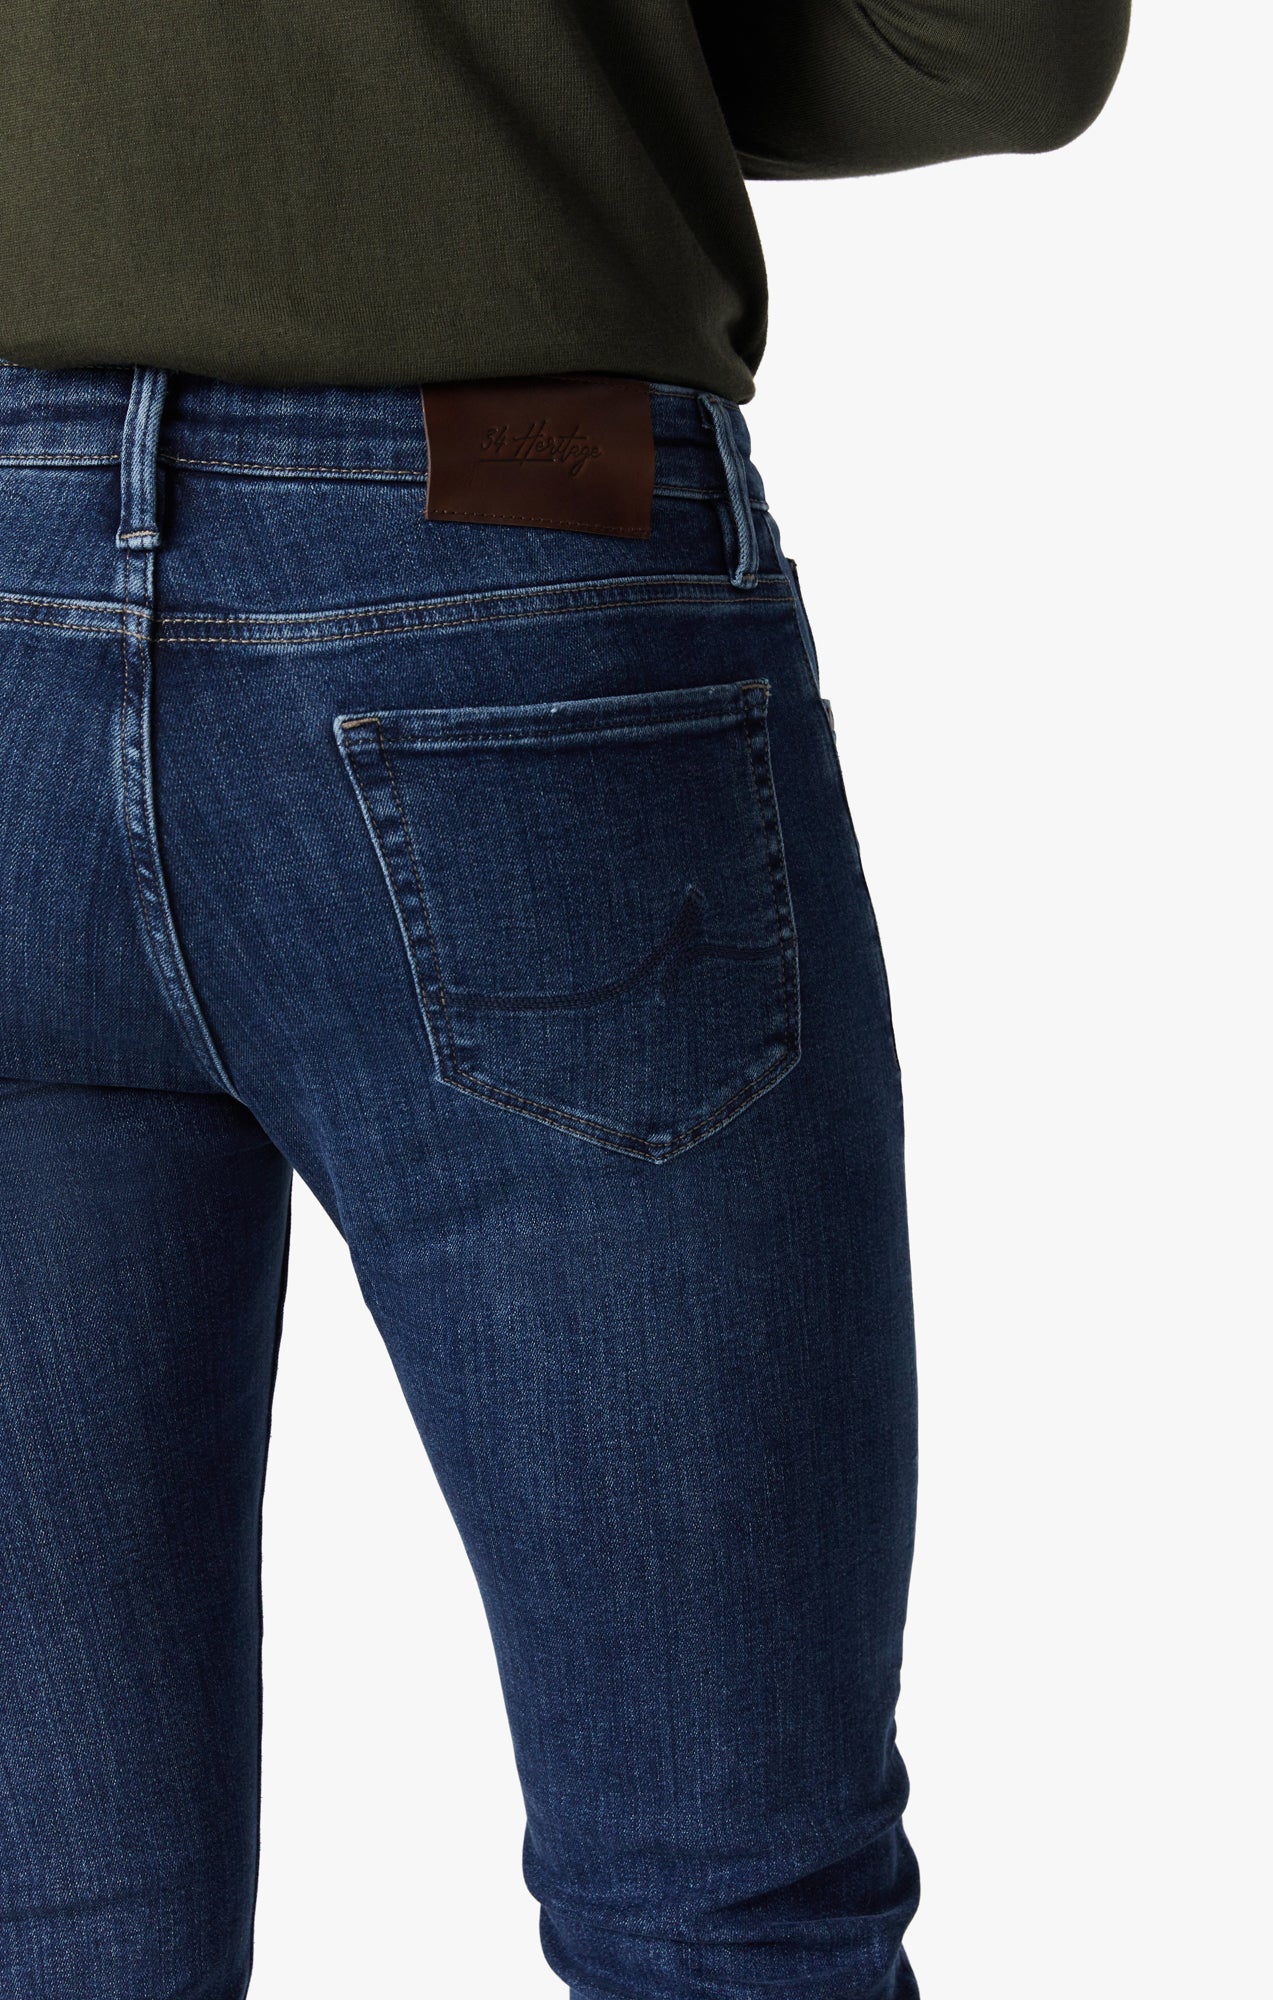 Courage Straight Leg Jeans in Deep Brushed Organic Image 6